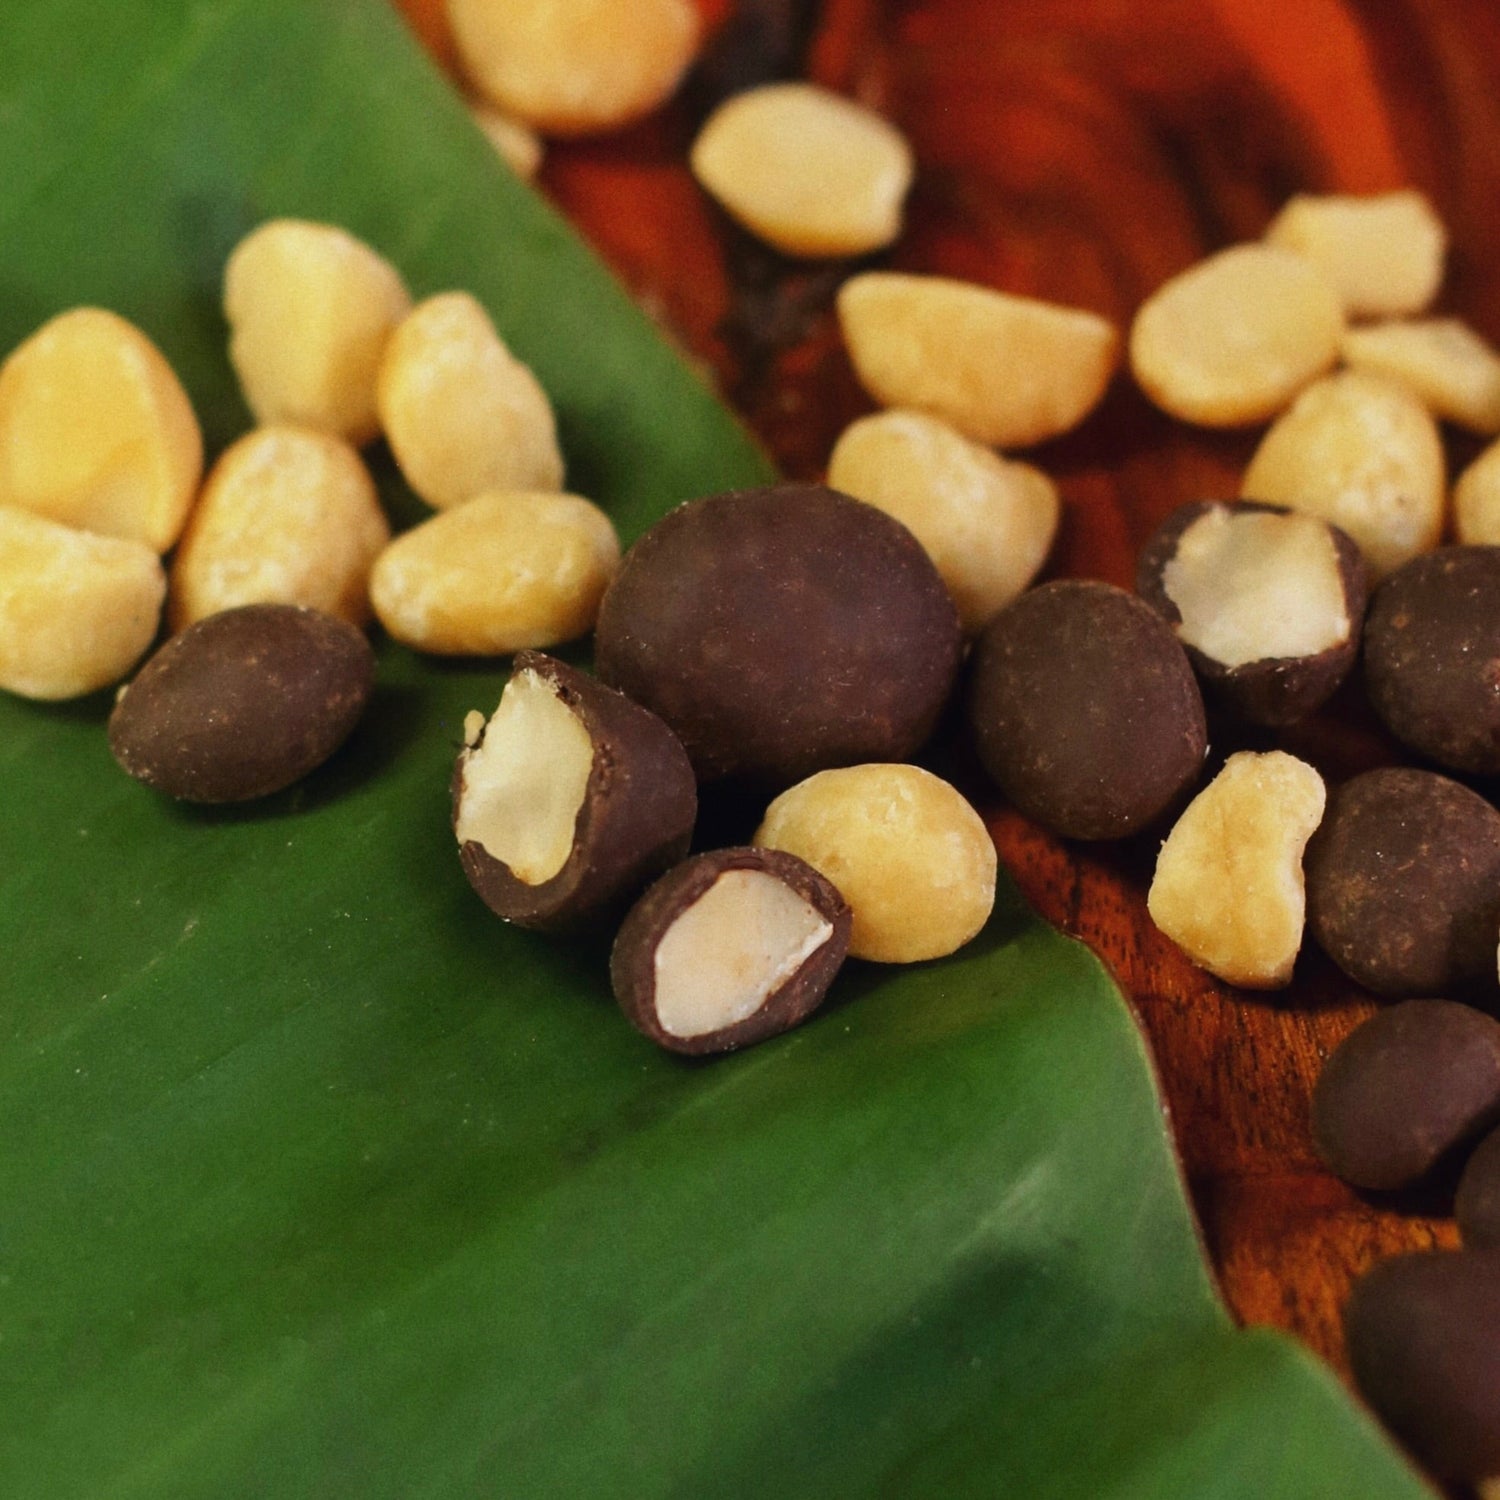 Image of chocolate-covered macadamias scattered on table